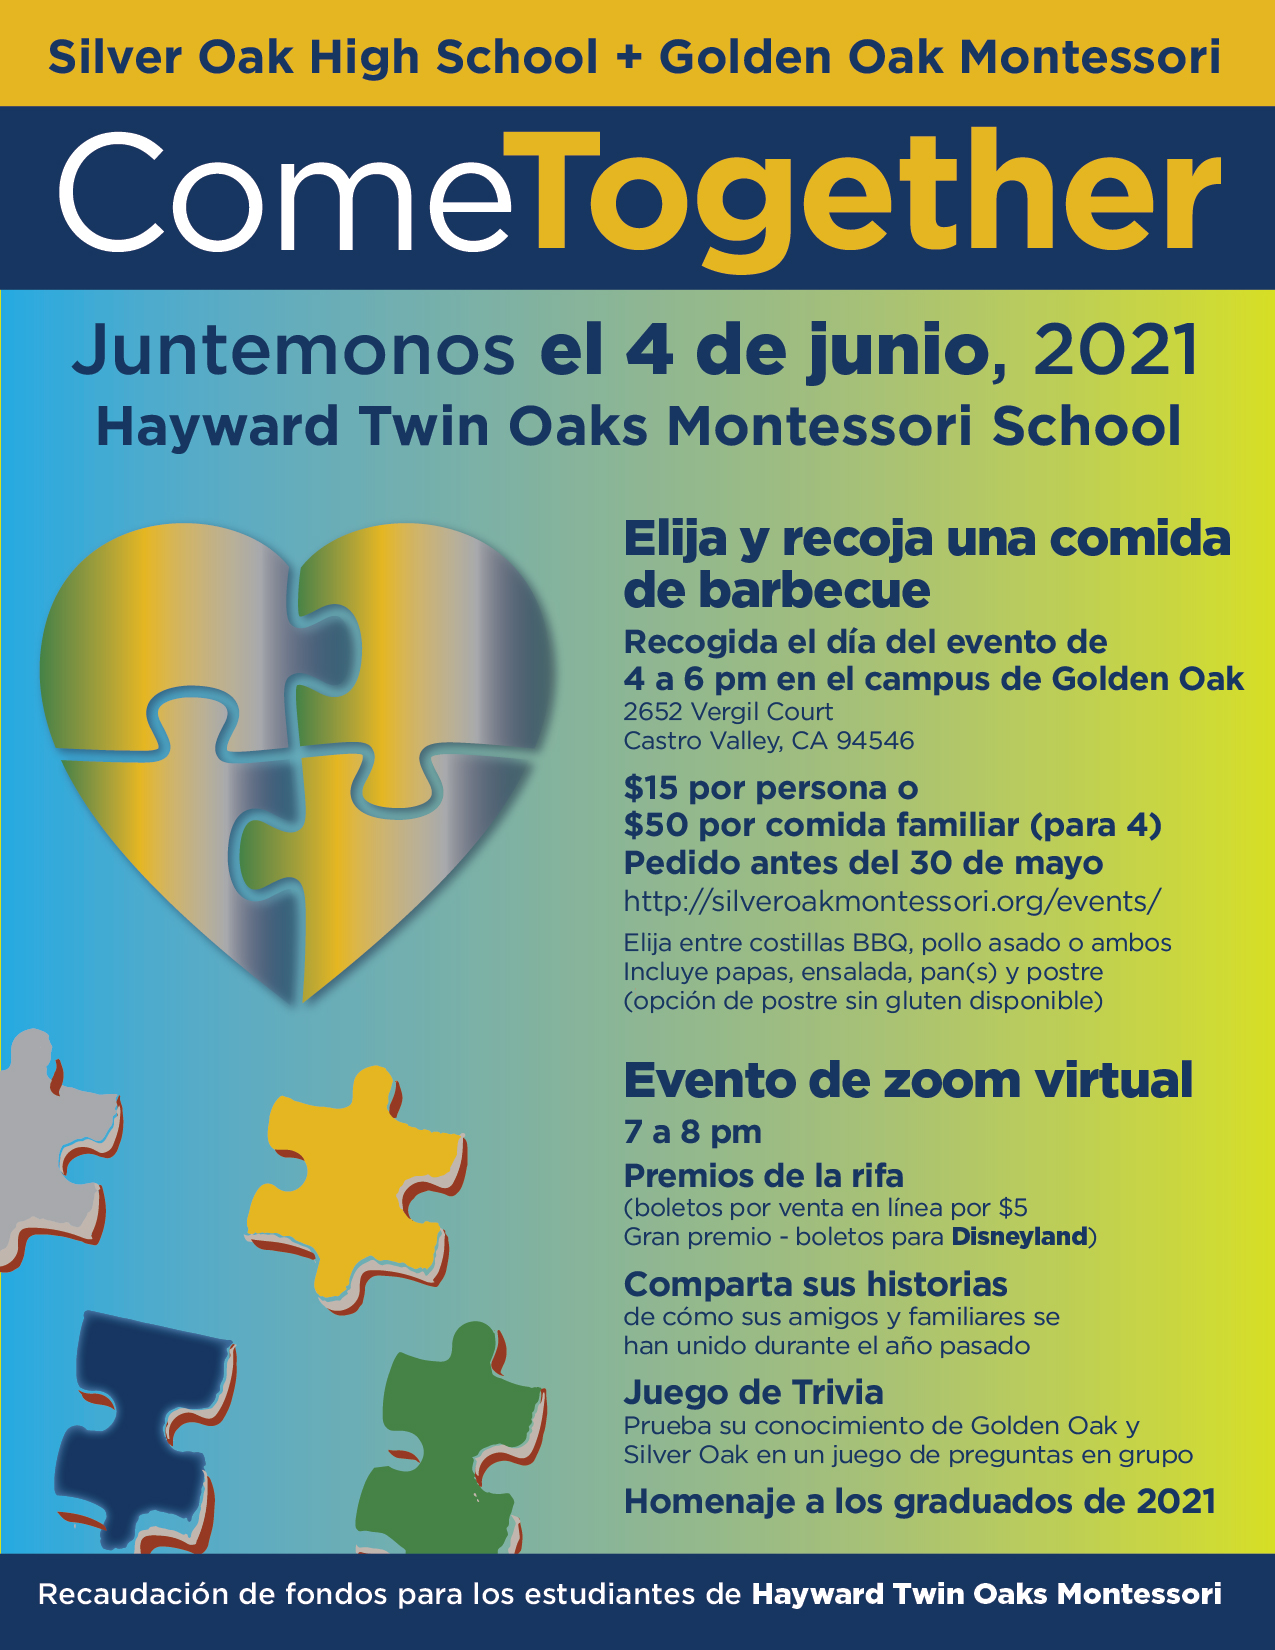 Come Together event, June 4th 2021